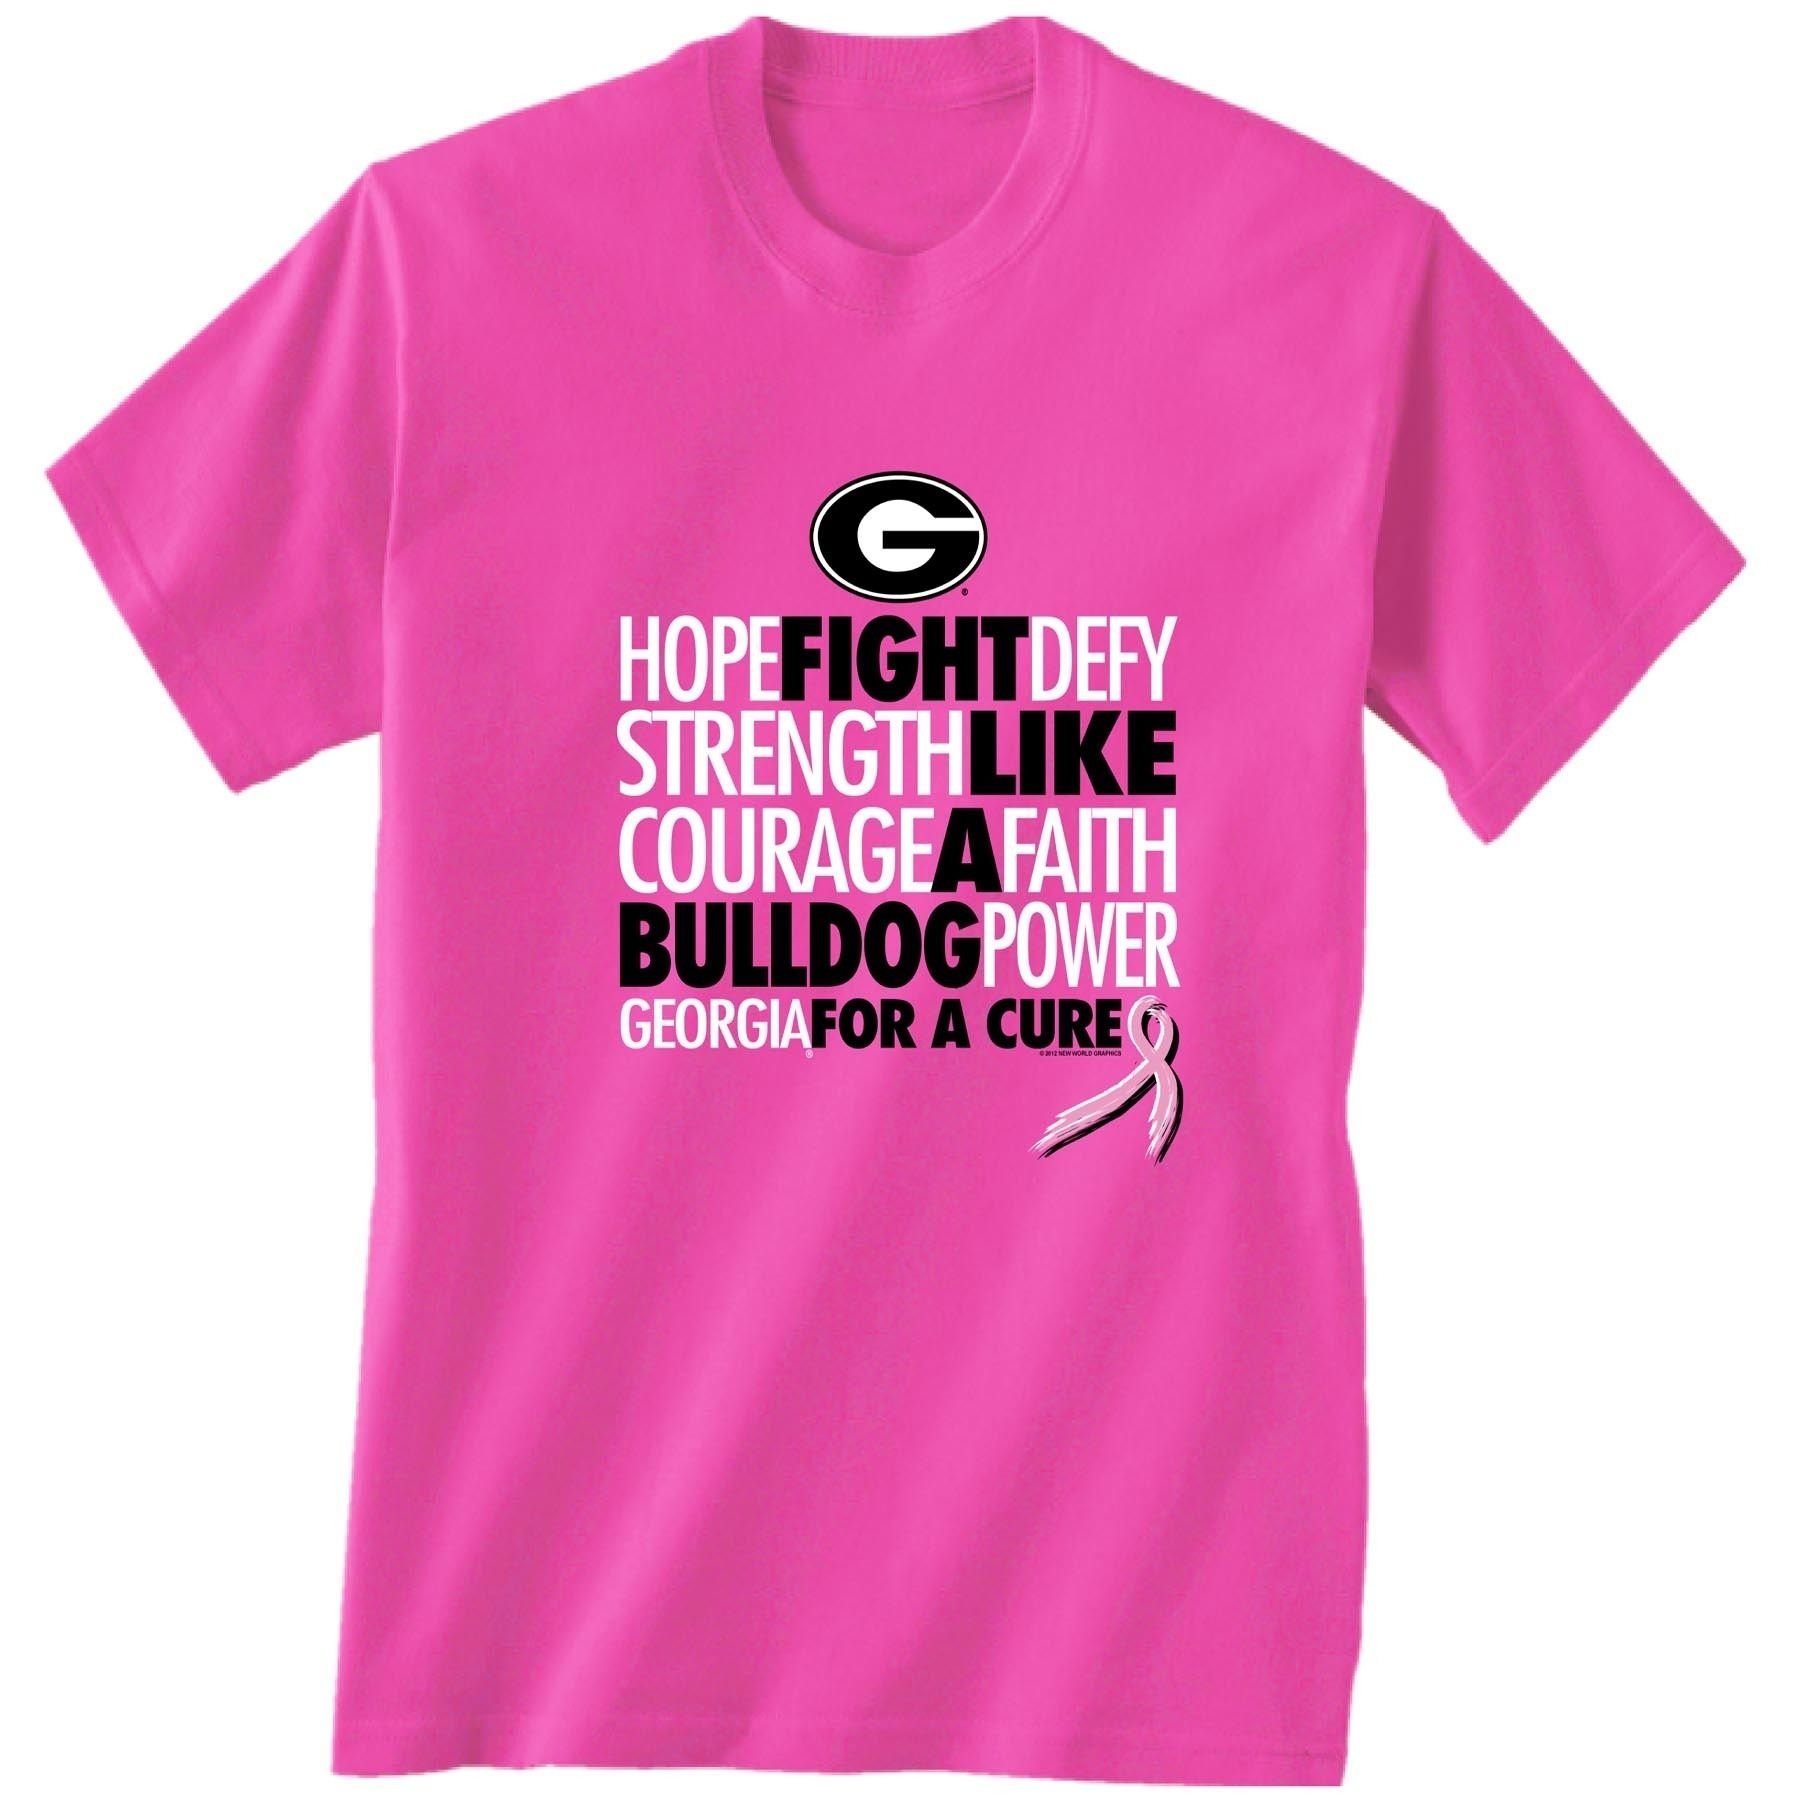 10 Attractive Breast Cancer T Shirt Ideas 2021